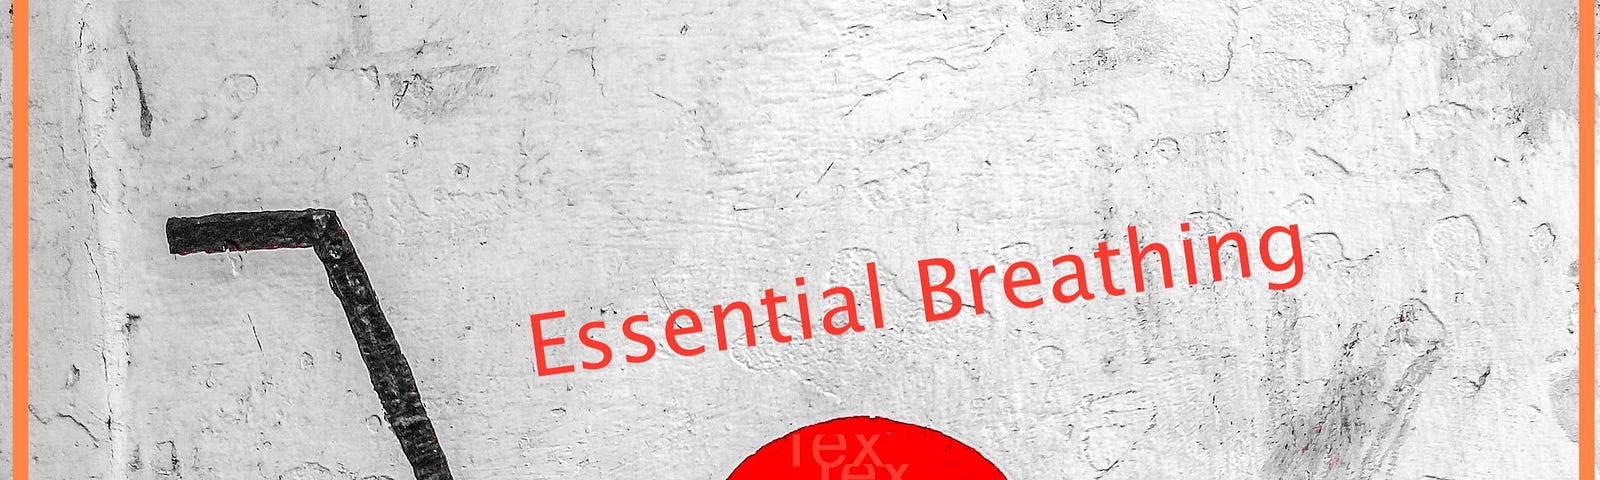 Shopping cart image with large red heart in it, and above it the words tilted, “Essential Breathing”.